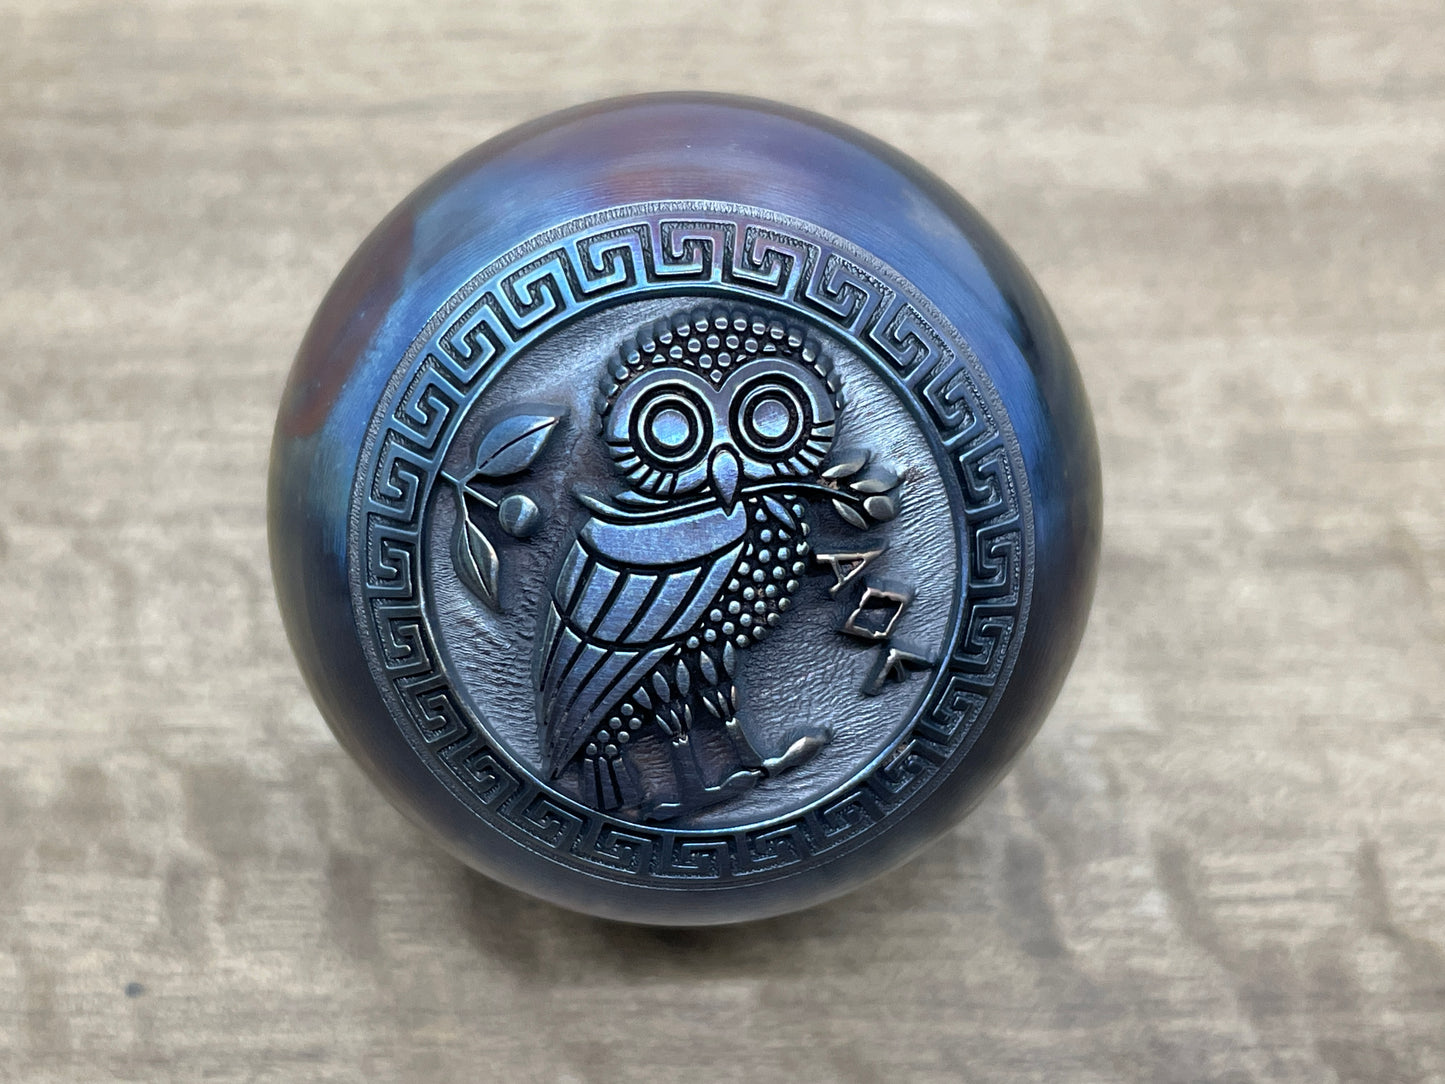 2.15" The OWL Deep engraved Flamed Stainless Steel SPHERE +TurboGlow stand